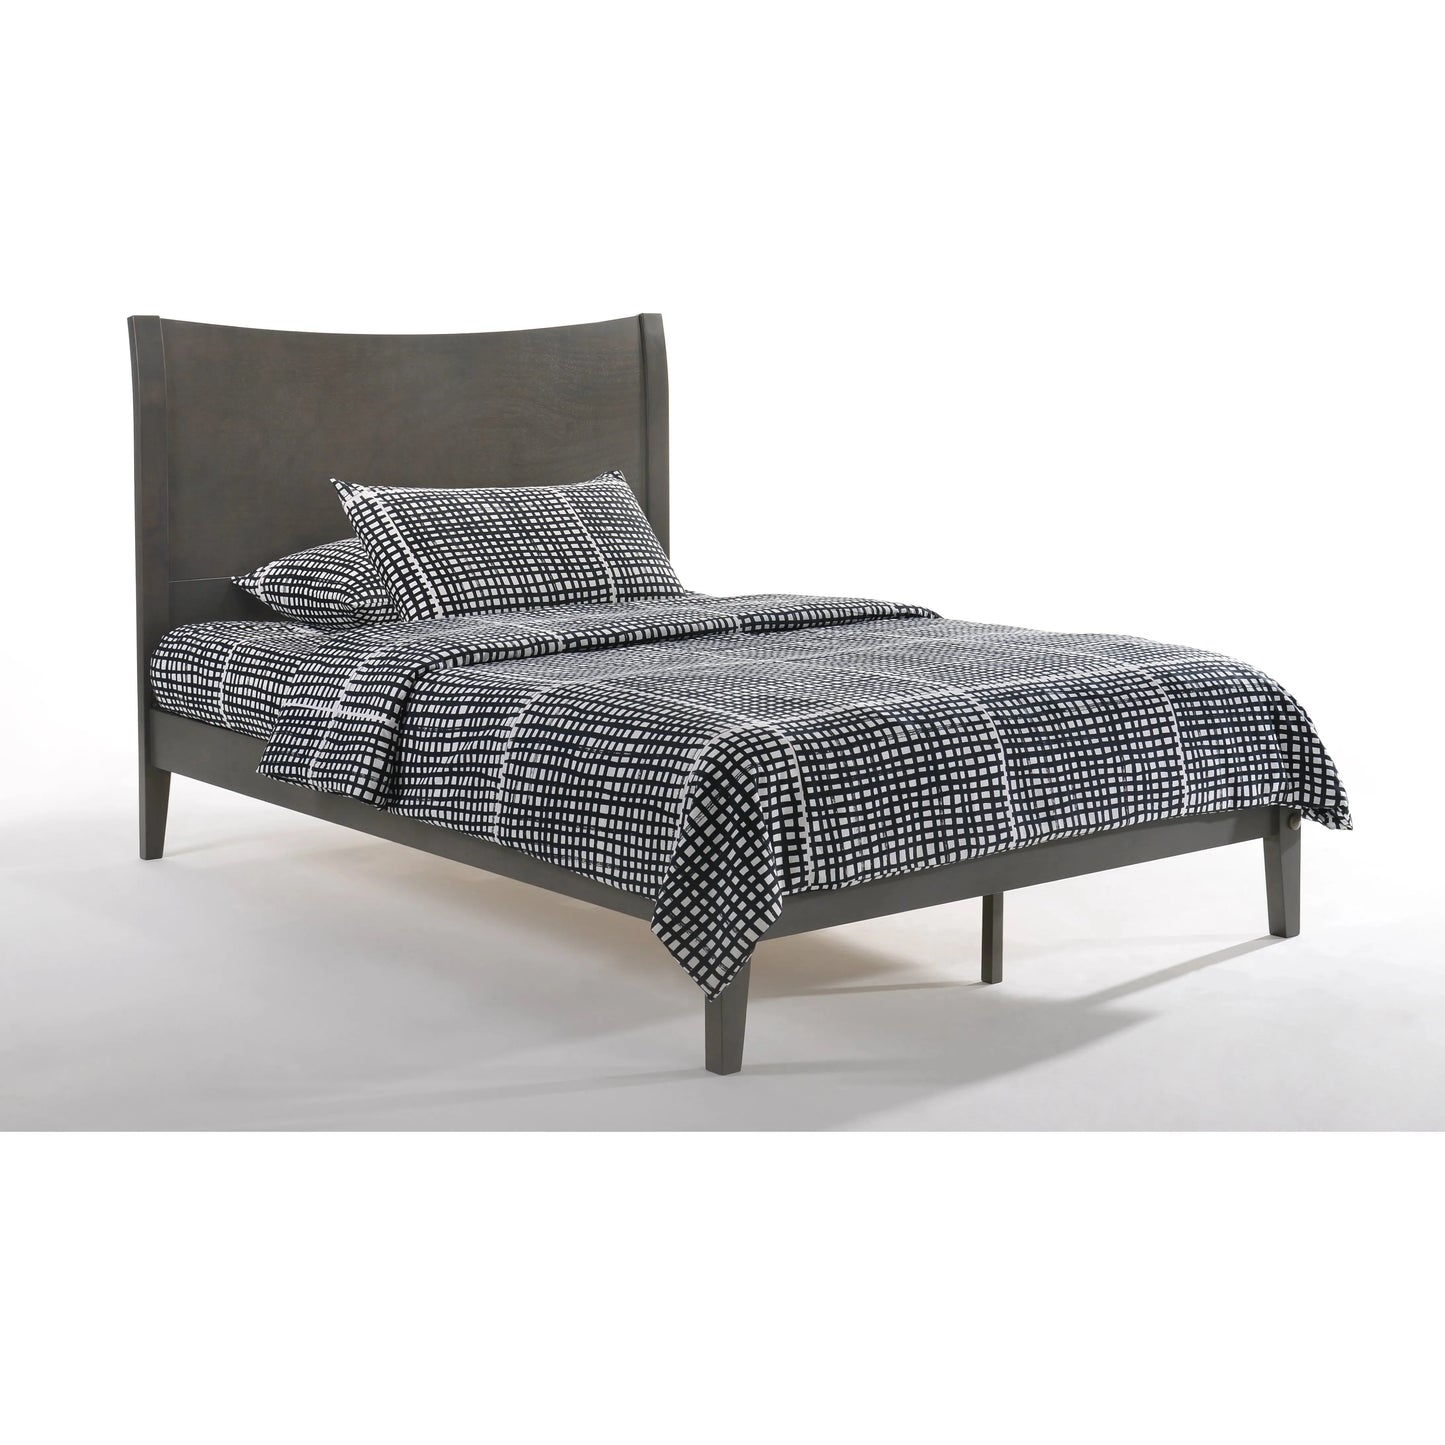 Night And Day Blackpepper Queen Bed in cherry finish (P Series) Stonewash BPE-PH-QEN-COM-P-STW